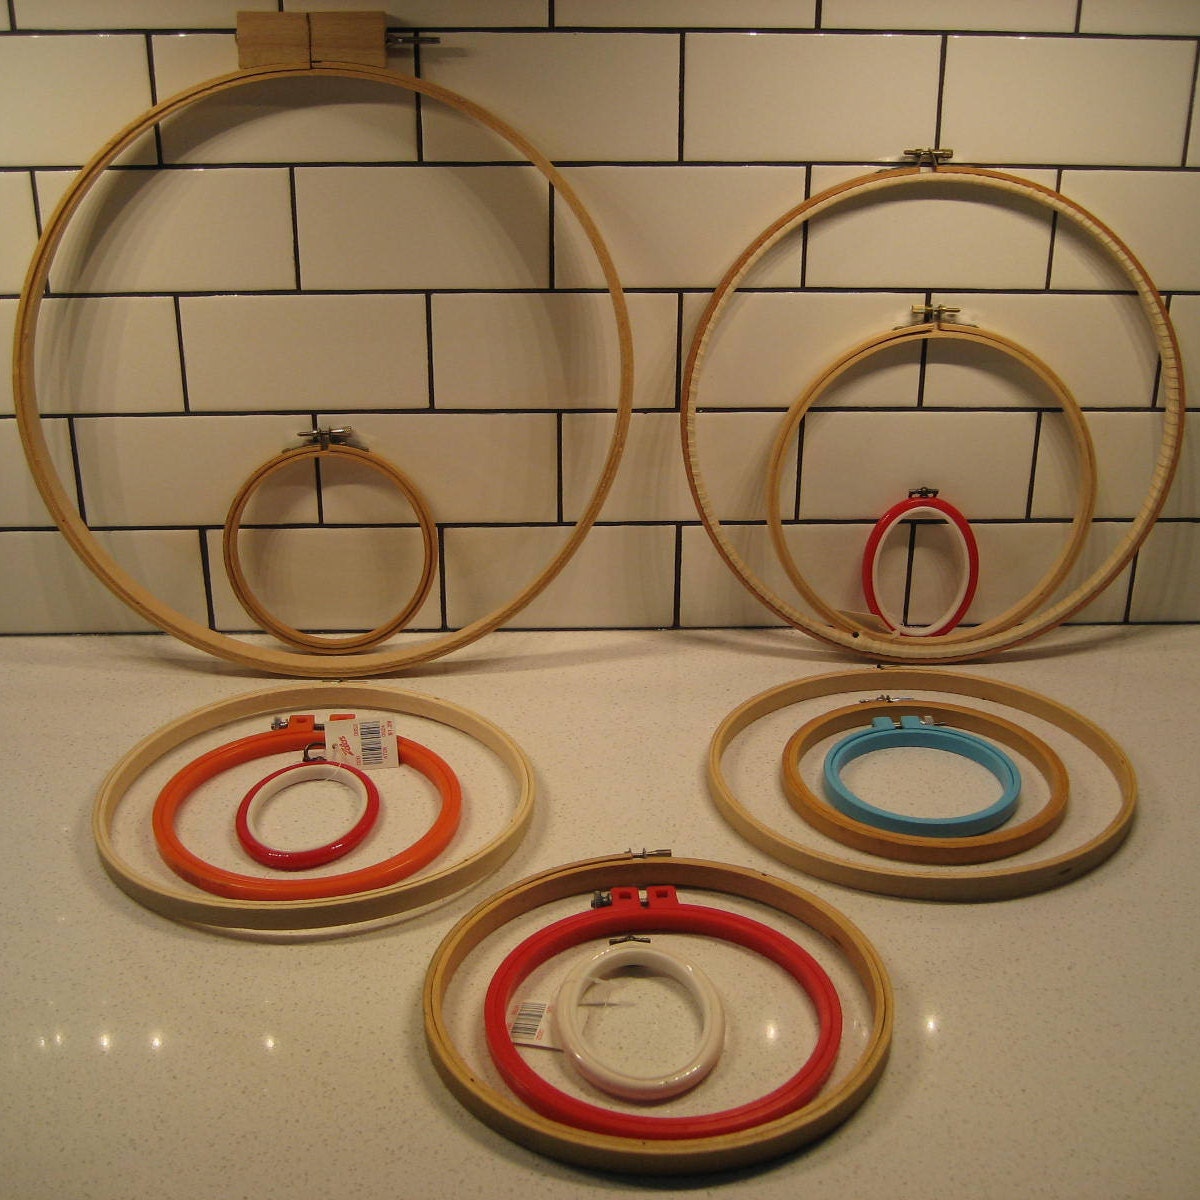 Quilting Hoop Natural